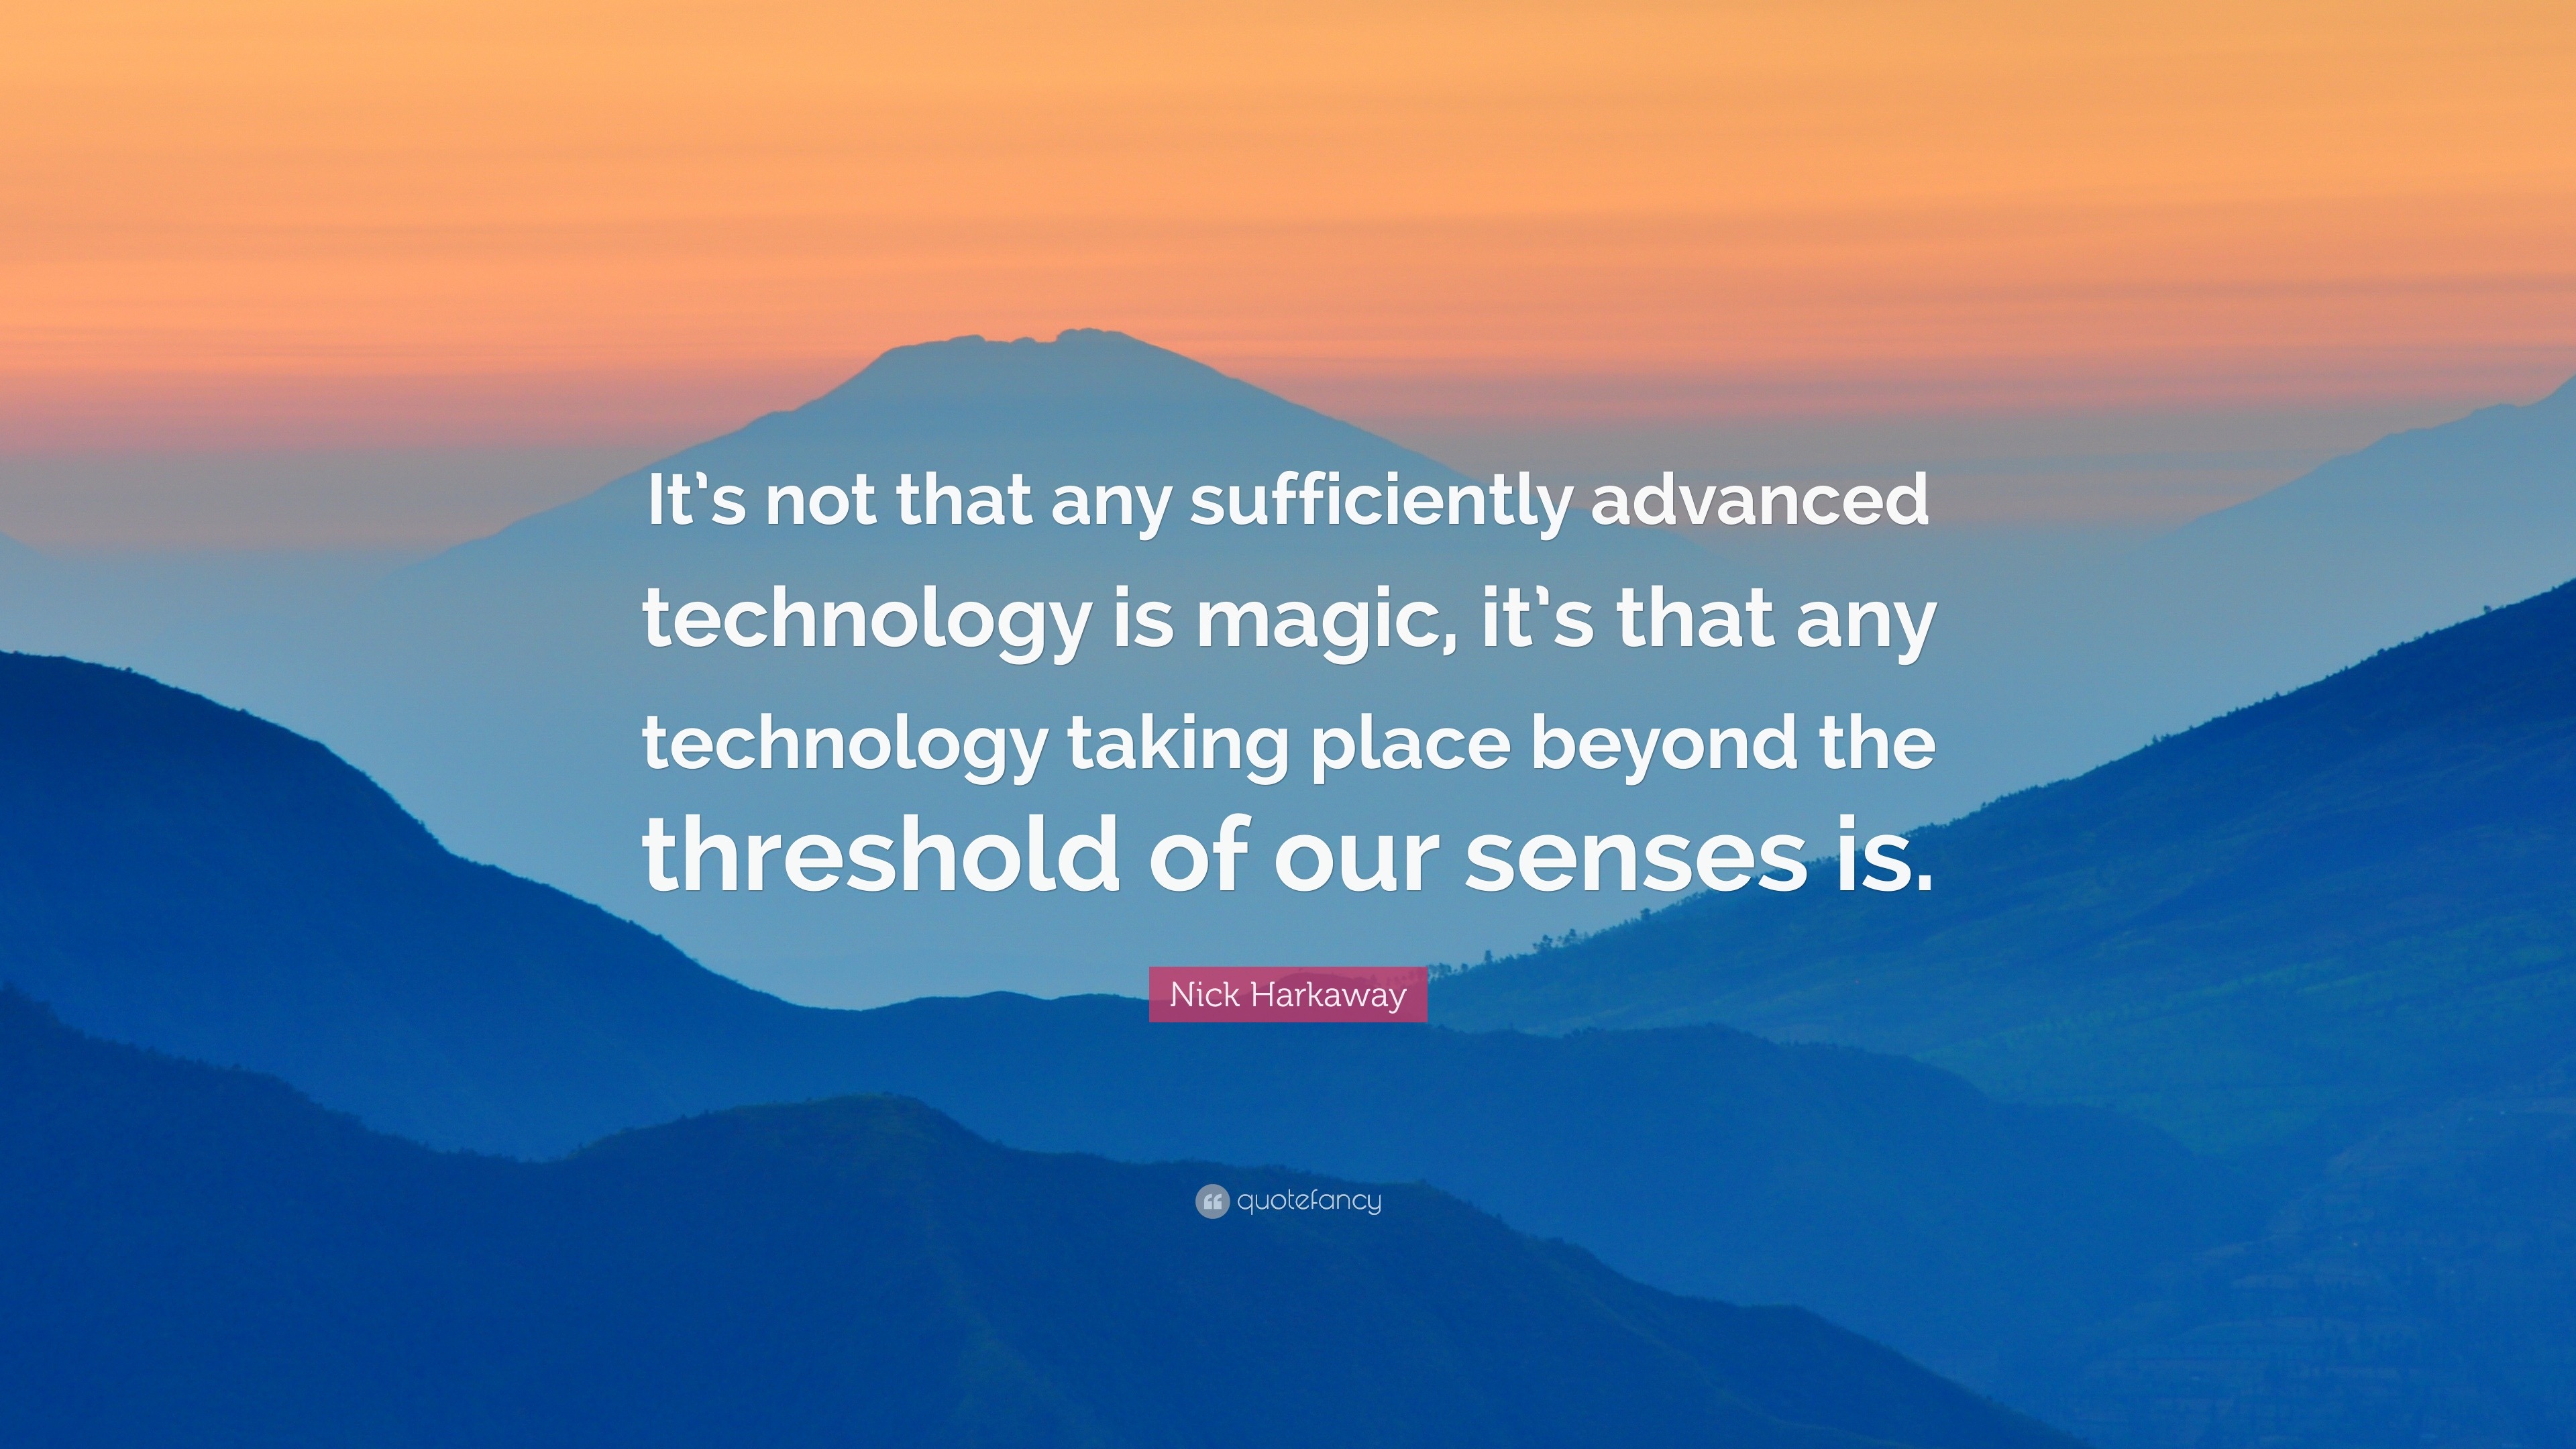 Nick Harkaway Quote: “It’s not that any sufficiently advanced ...